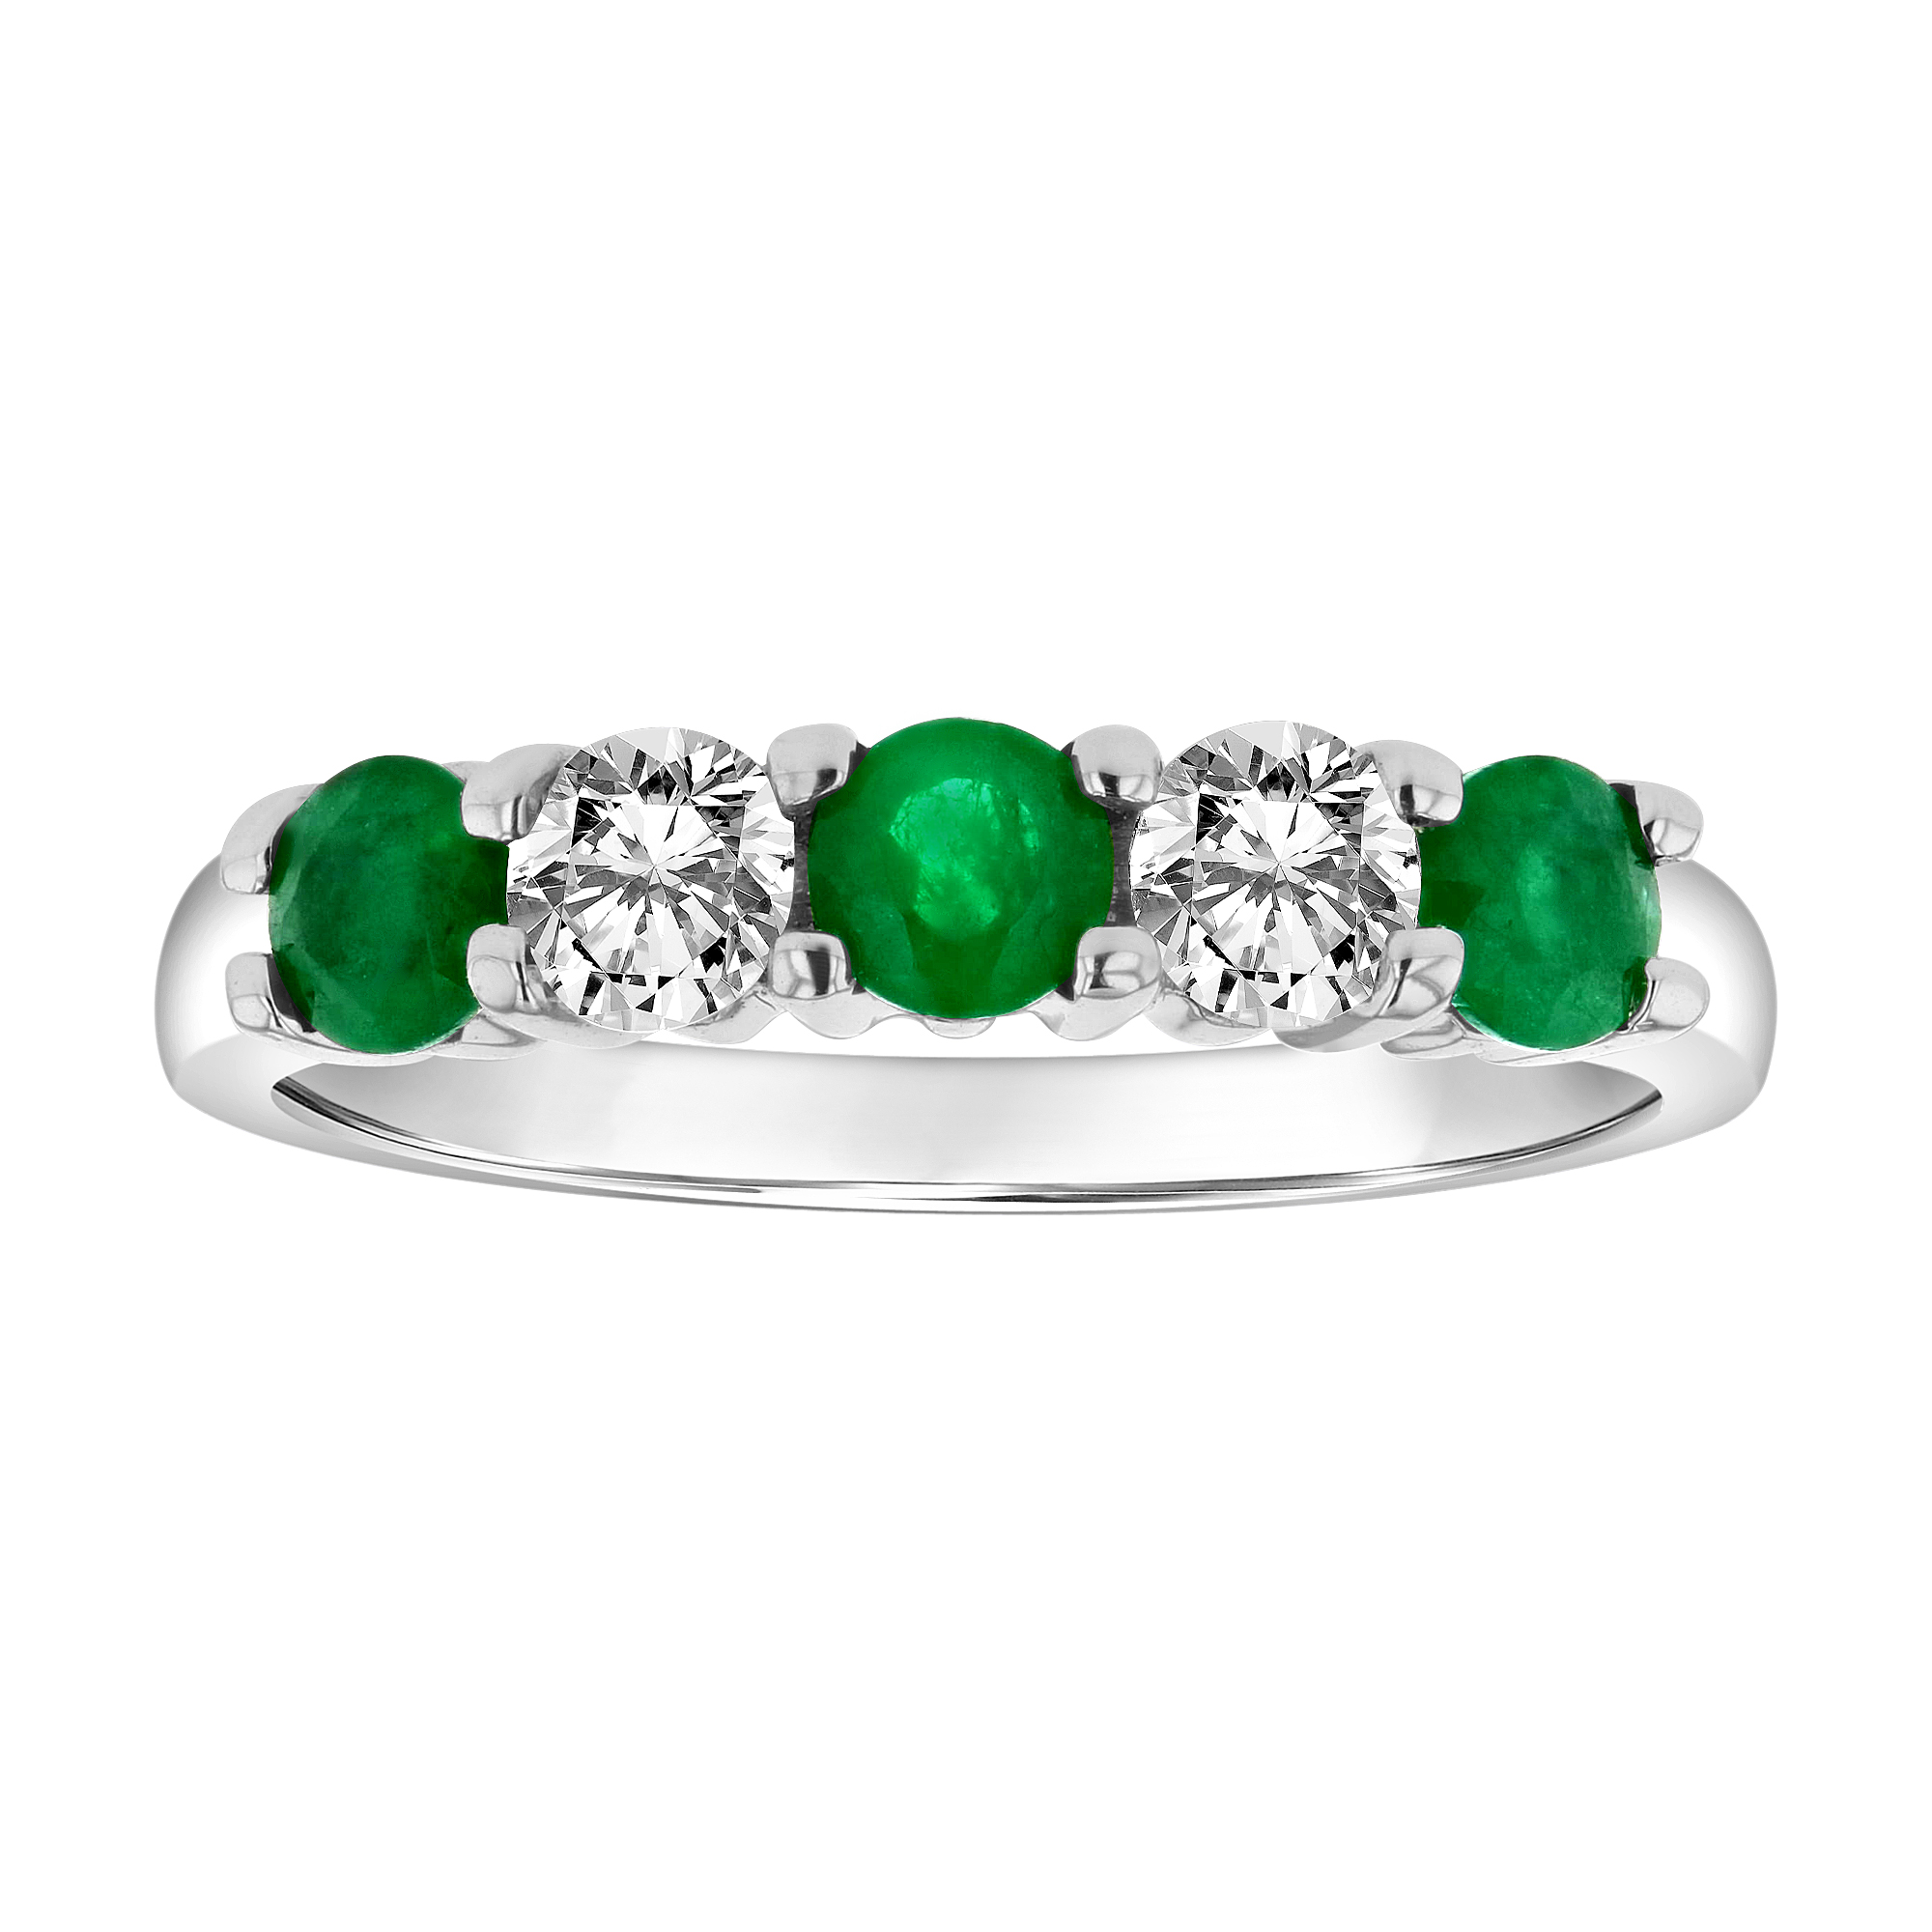 1.11cttw Emerald and Diamond Band set in 14k Gold